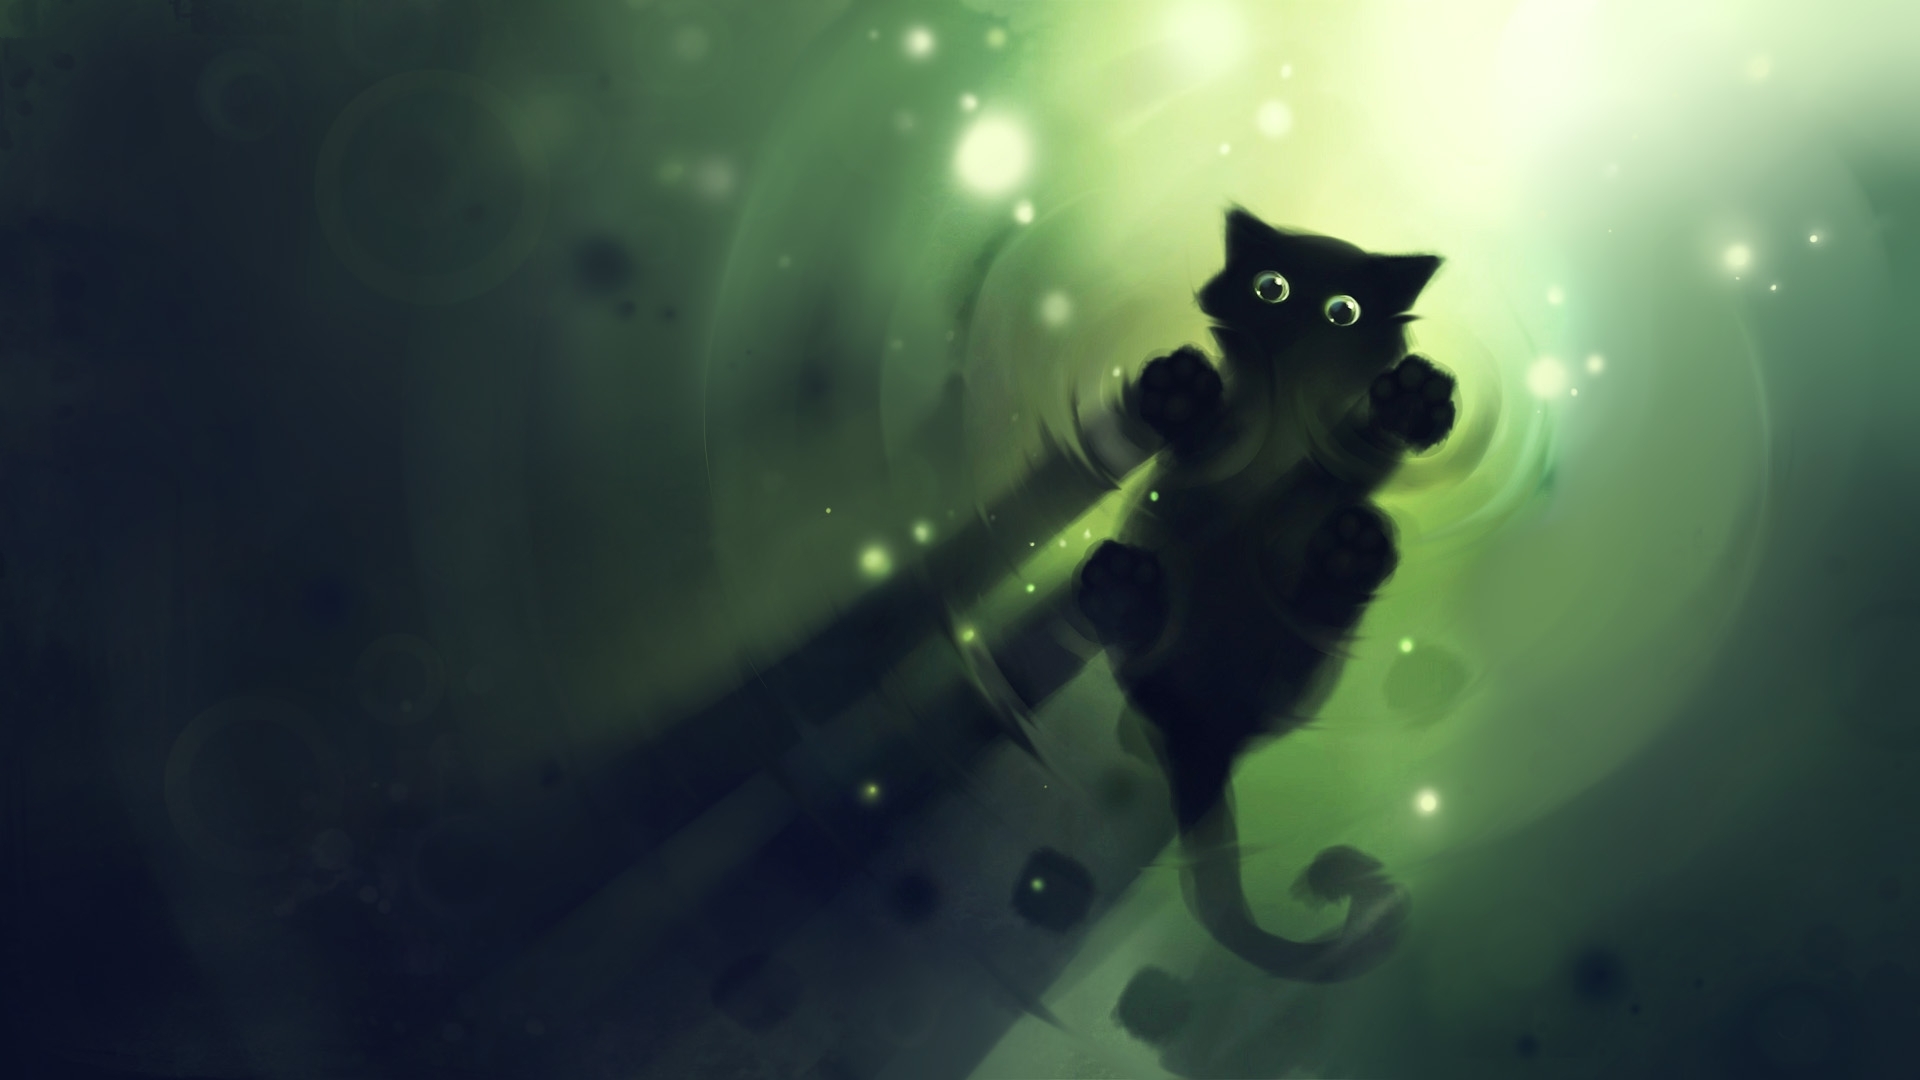 PC Wallpapers cats, animals, pictures, green